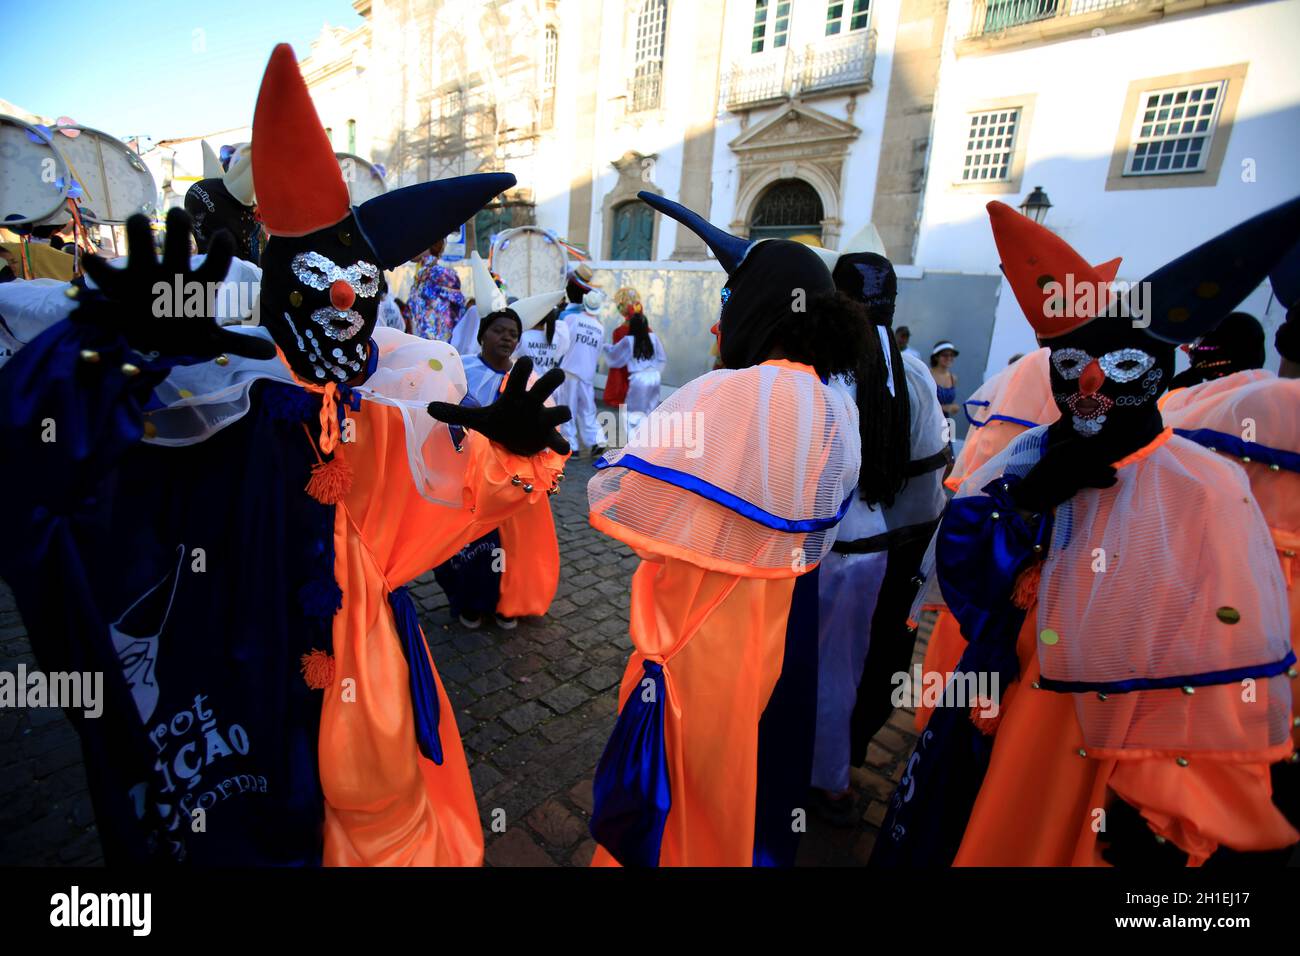 salvador, bahia / brazil - february 5, 2016: masked men are seen in Pelourinho during the carnival in the city of Salvador. *** Local Caption *** Stock Photo